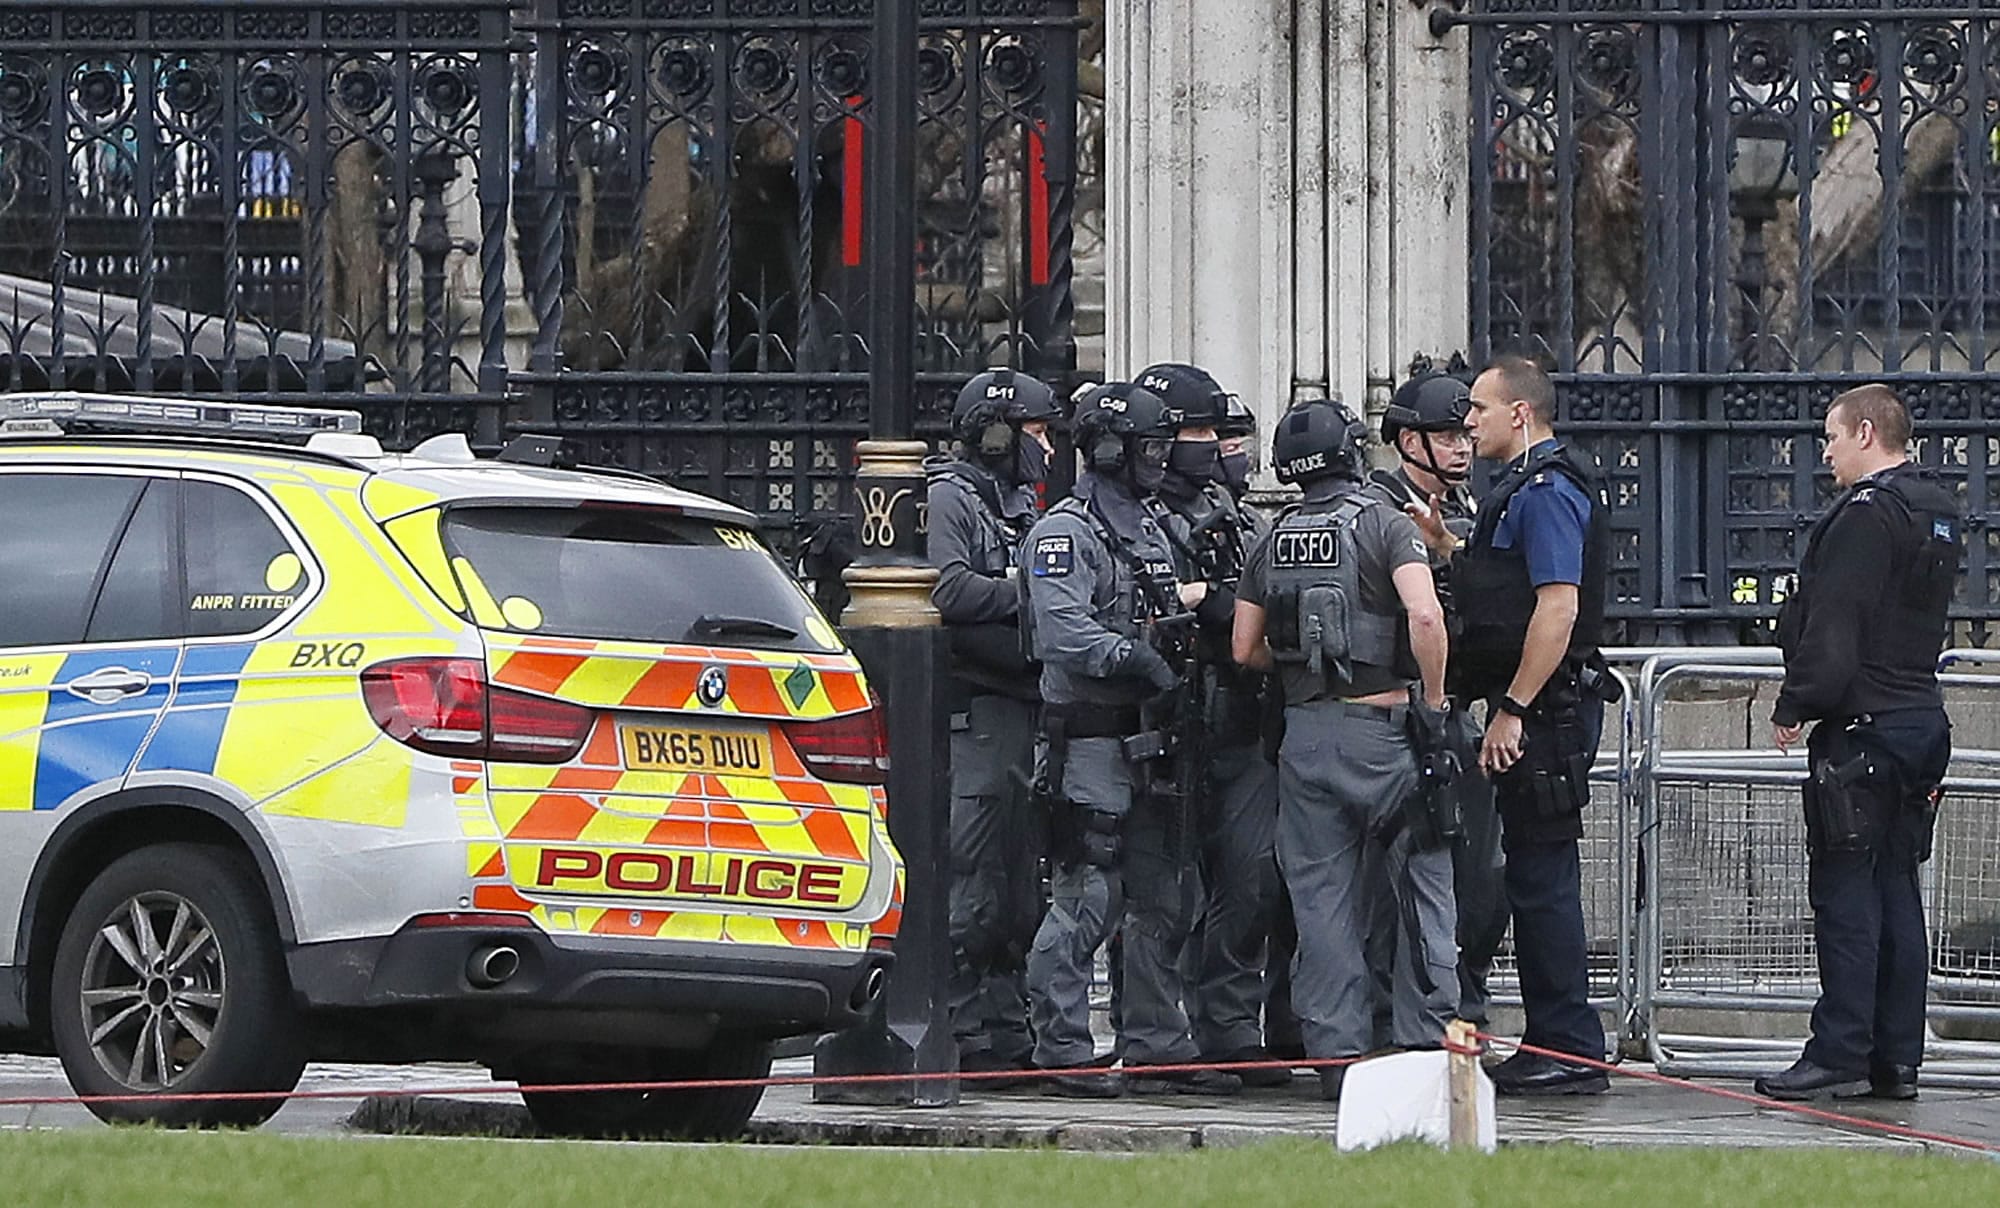 Armed police officers gather outside of the Houses of Parliament in London, Wednesday, March 23, 2017 after the House of Commons sitting was suspended as witnesses reported sounds like gunfire outside. The leader of Britain's House of Commons says a man has been shot by police at Parliament.